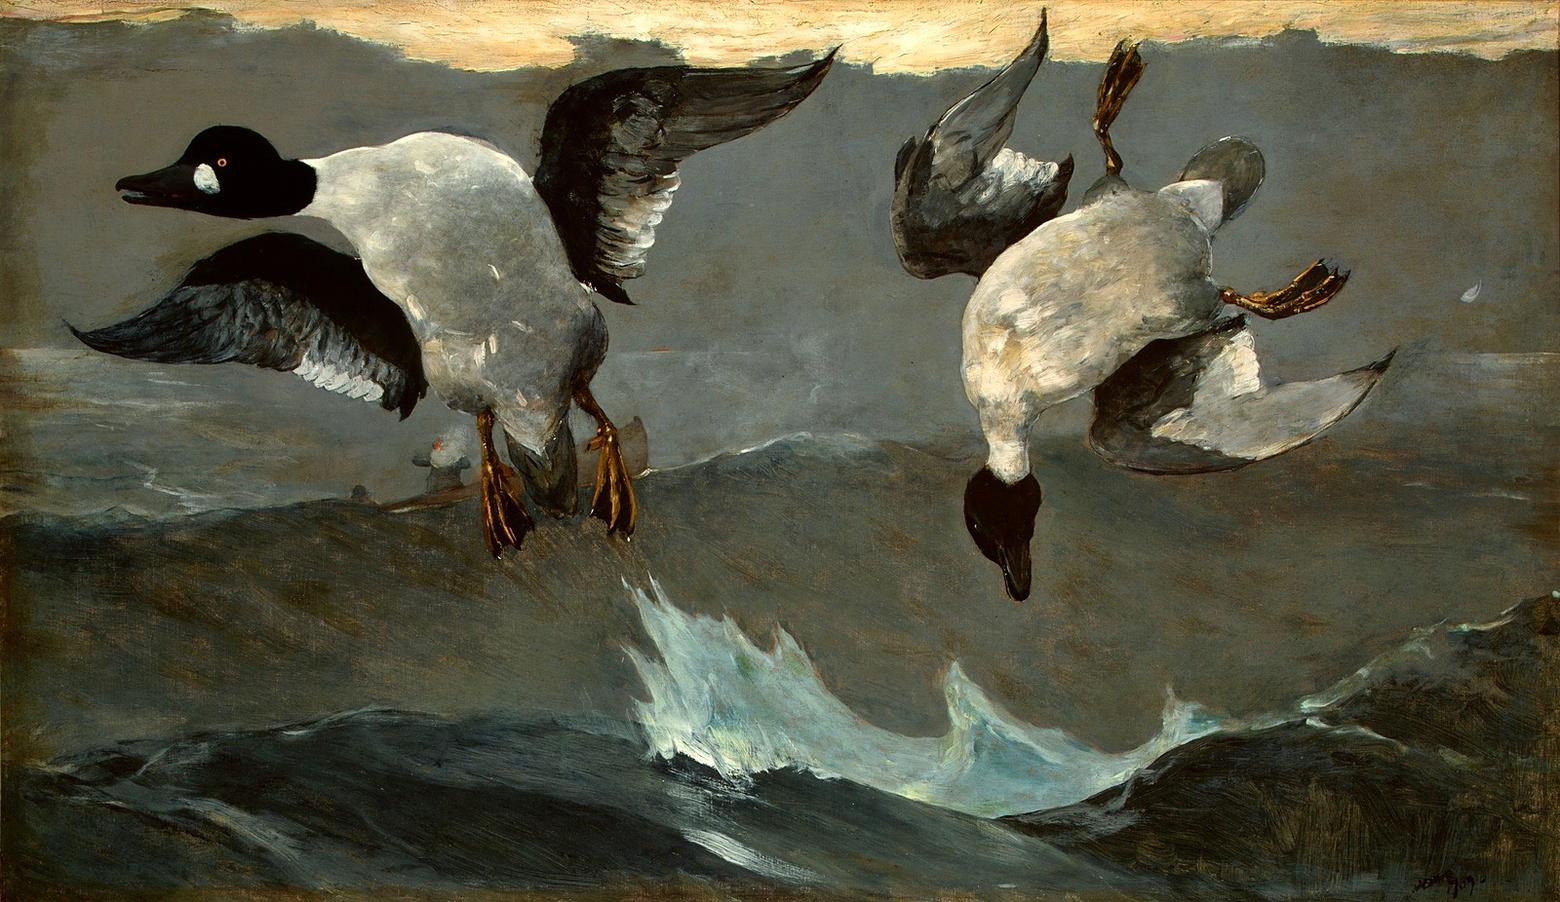 Winslow Homer's painting "Right and Left" part of the permanent collection of the National Gallery of Art in Washington DC